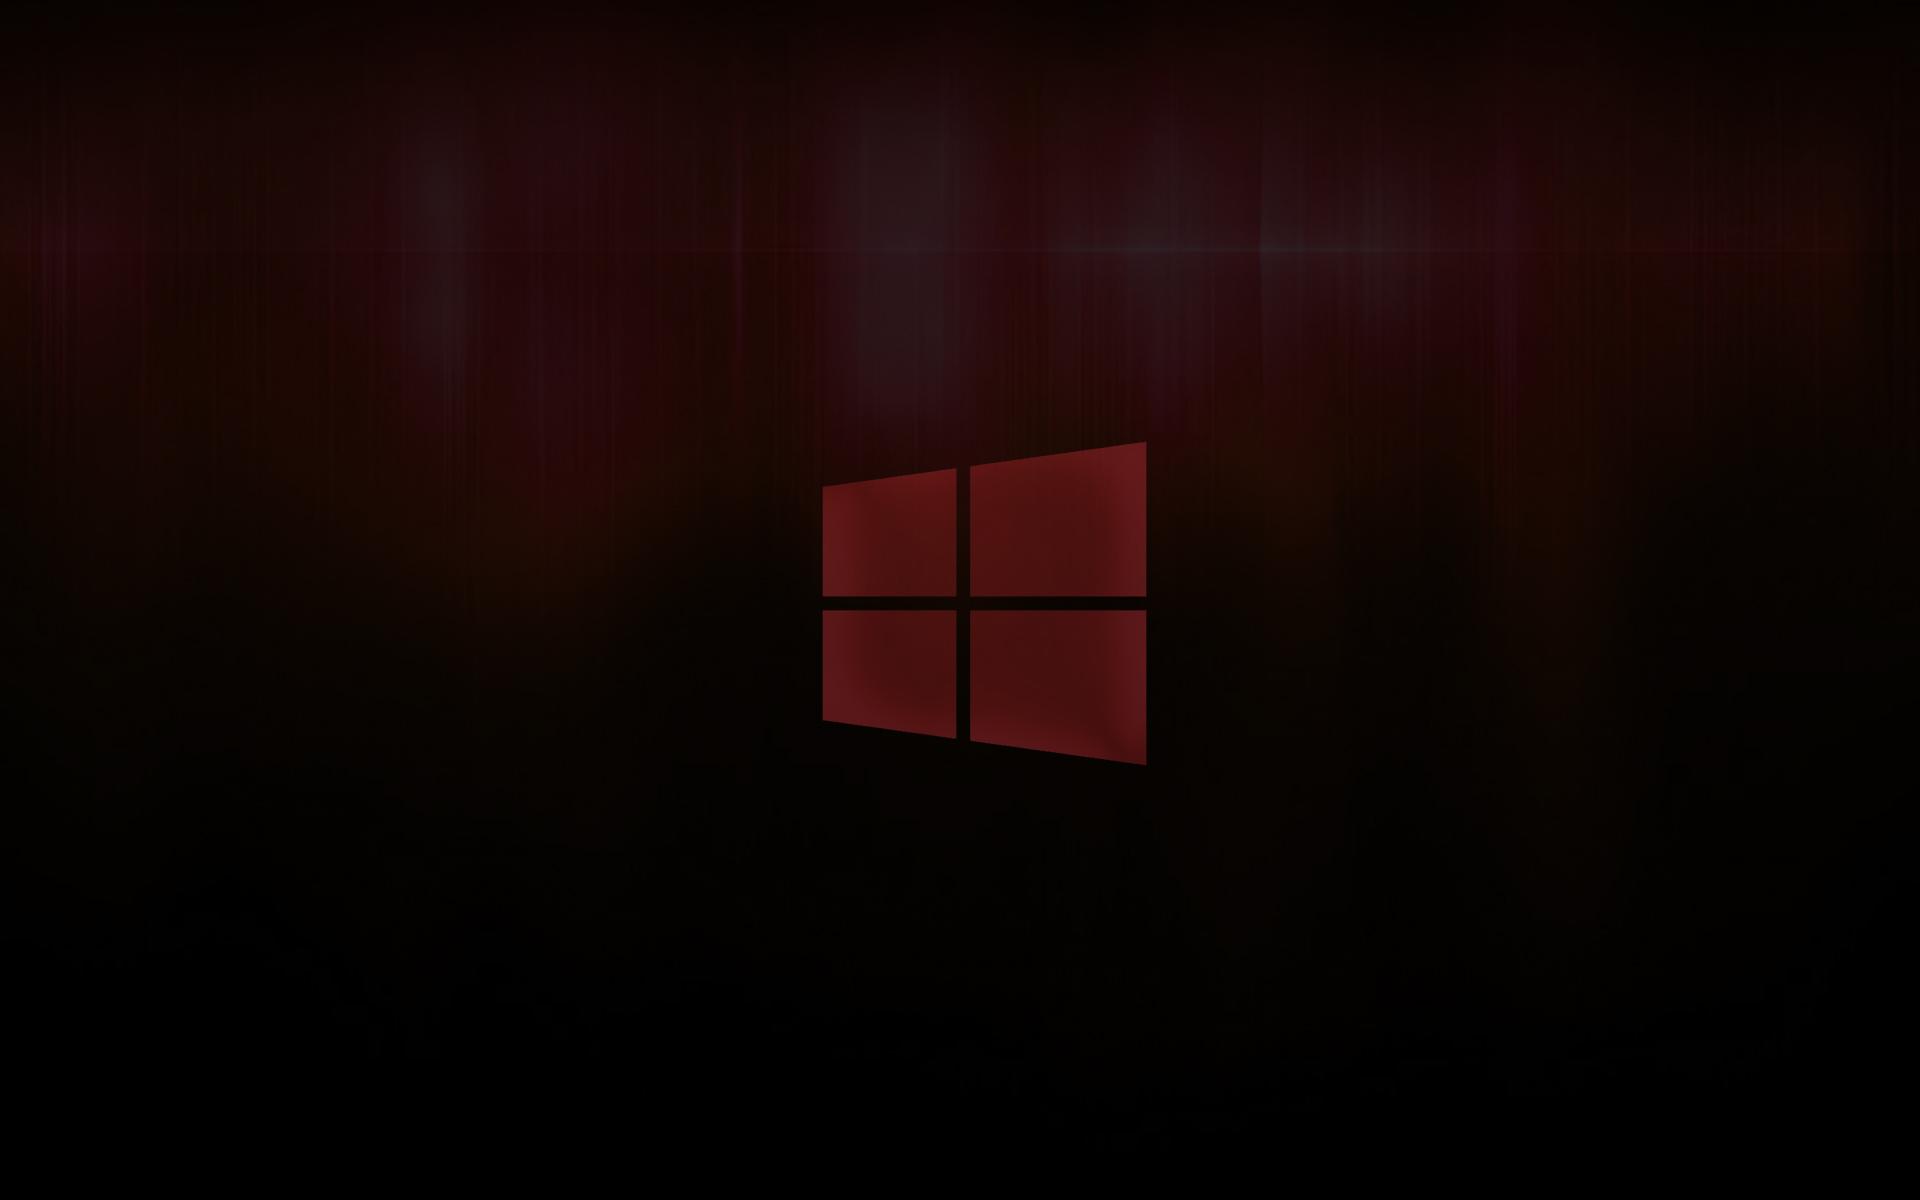 Windows 10 wallpaper that I made [1920 X 1200]. Also have a blue